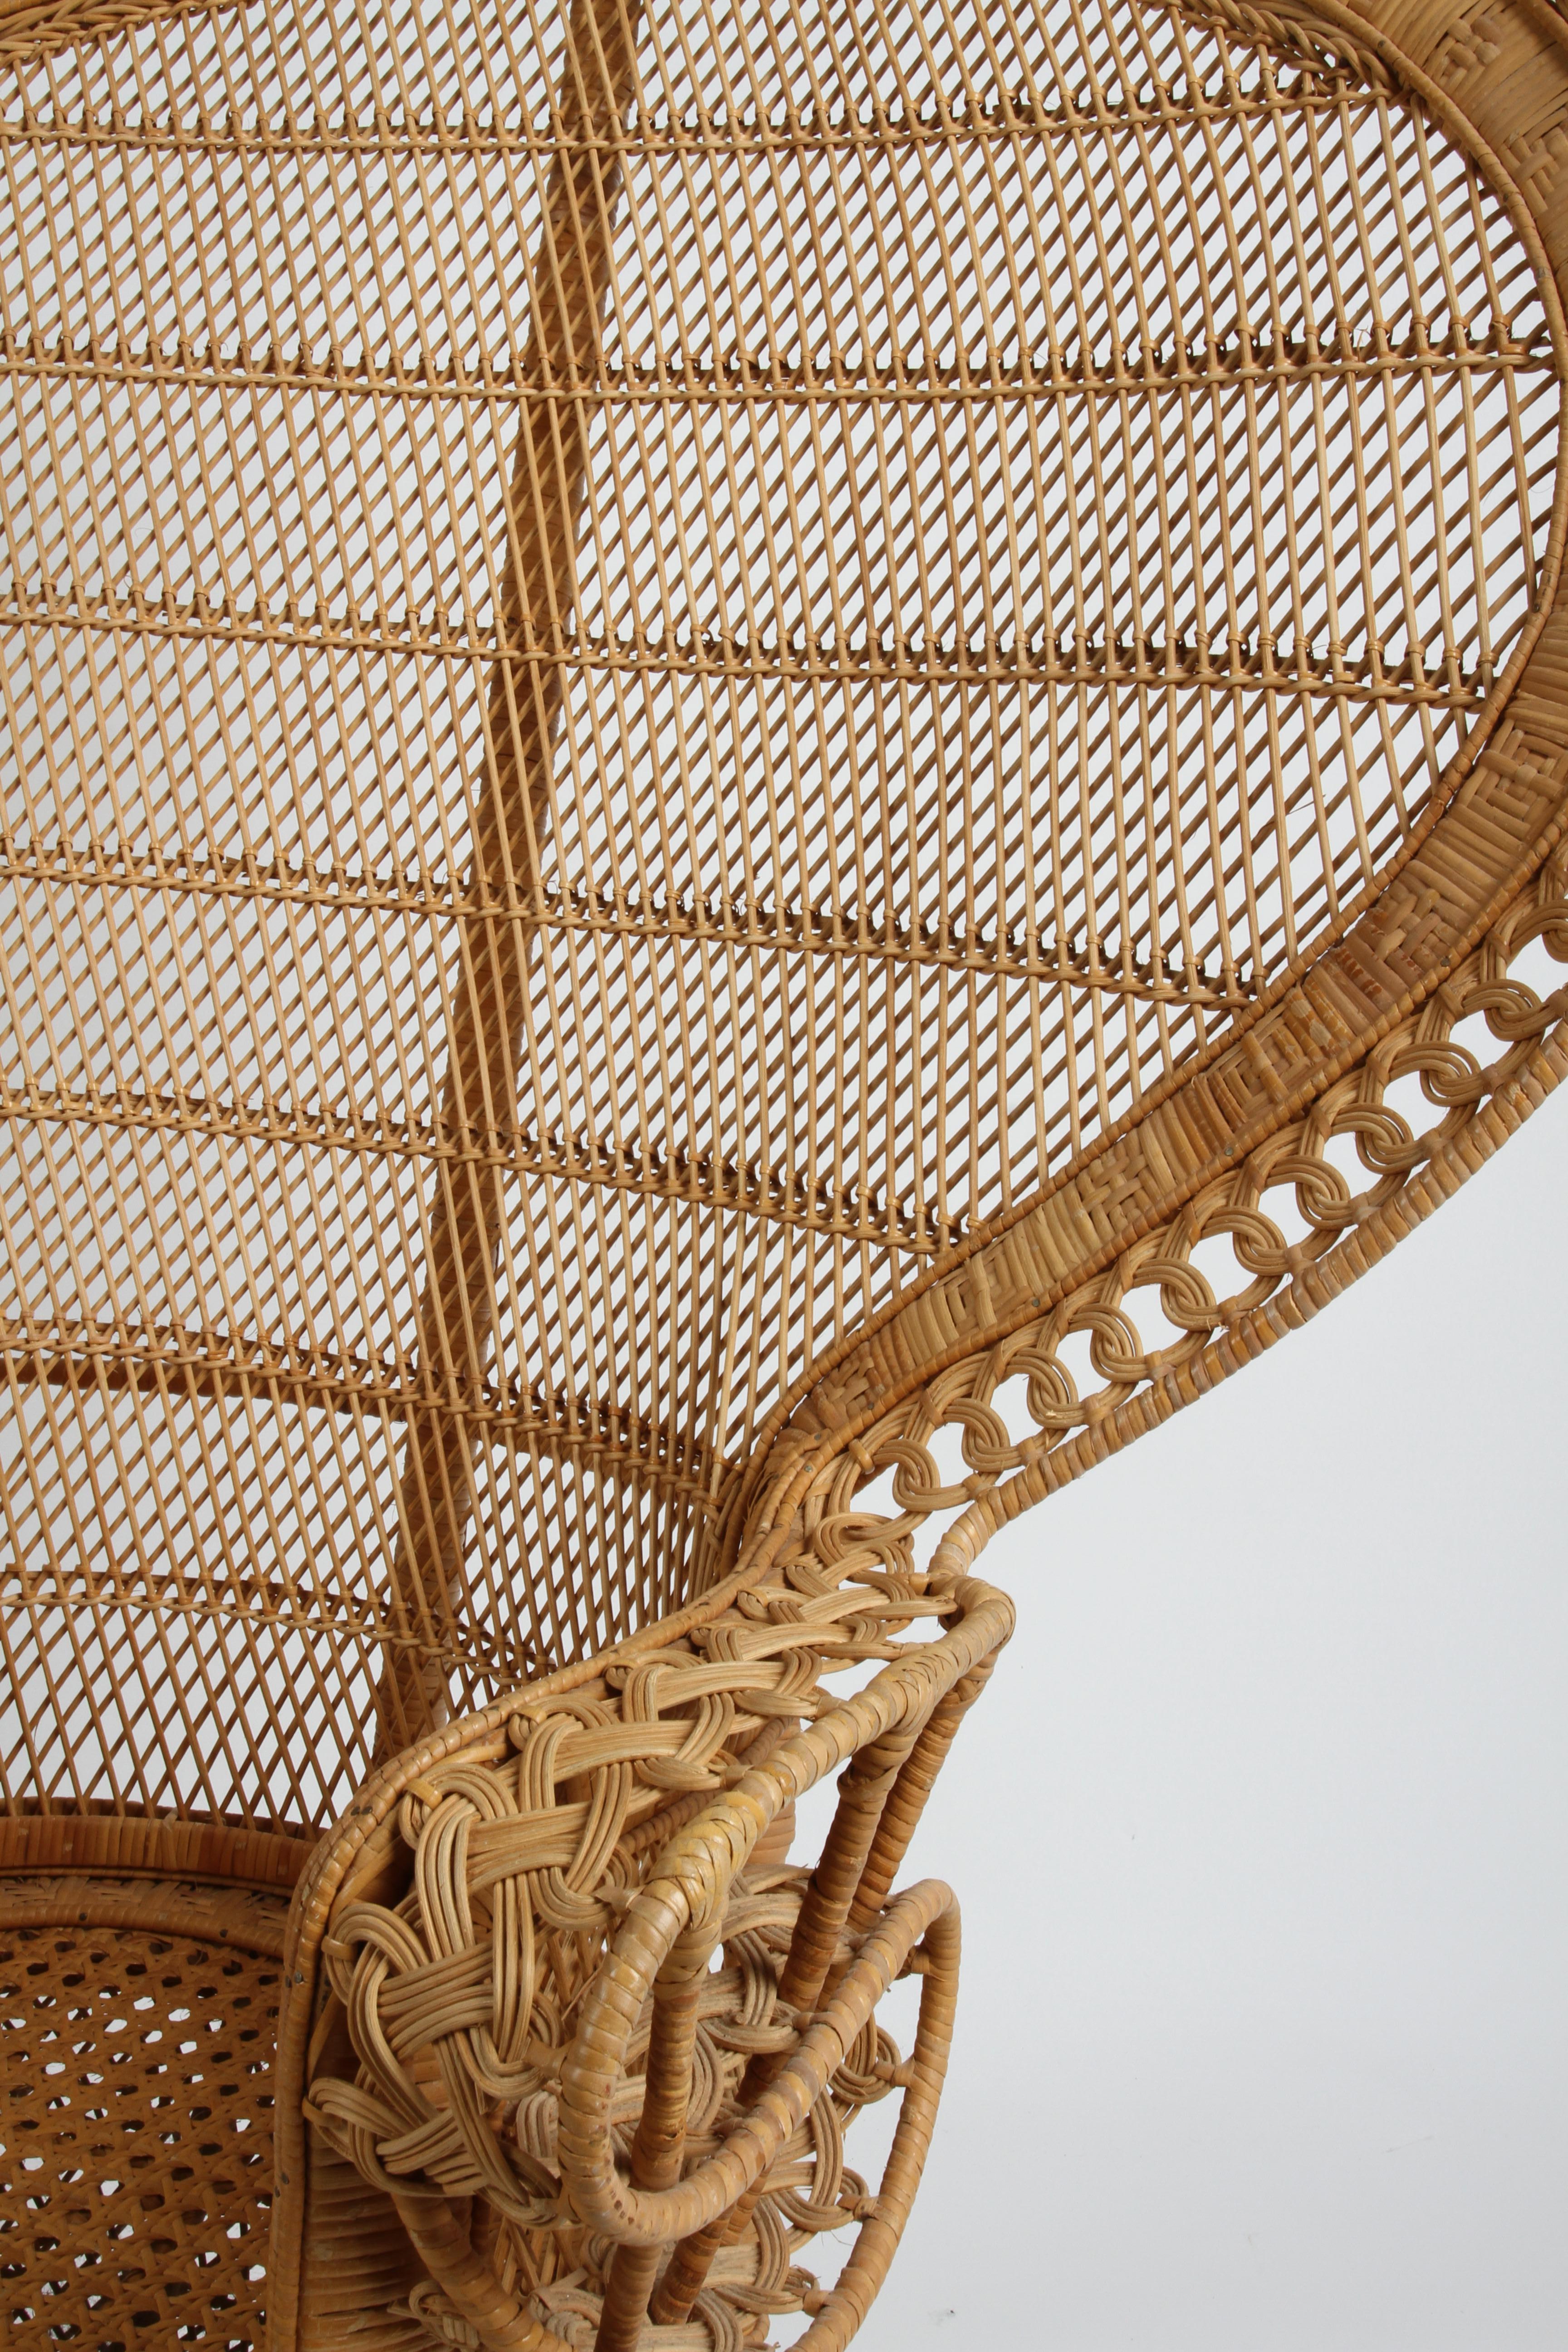 Vintage 1970s Rattan & Wicker Handcrafted Boho Chic Emmanuelle Peacock Chair For Sale 10